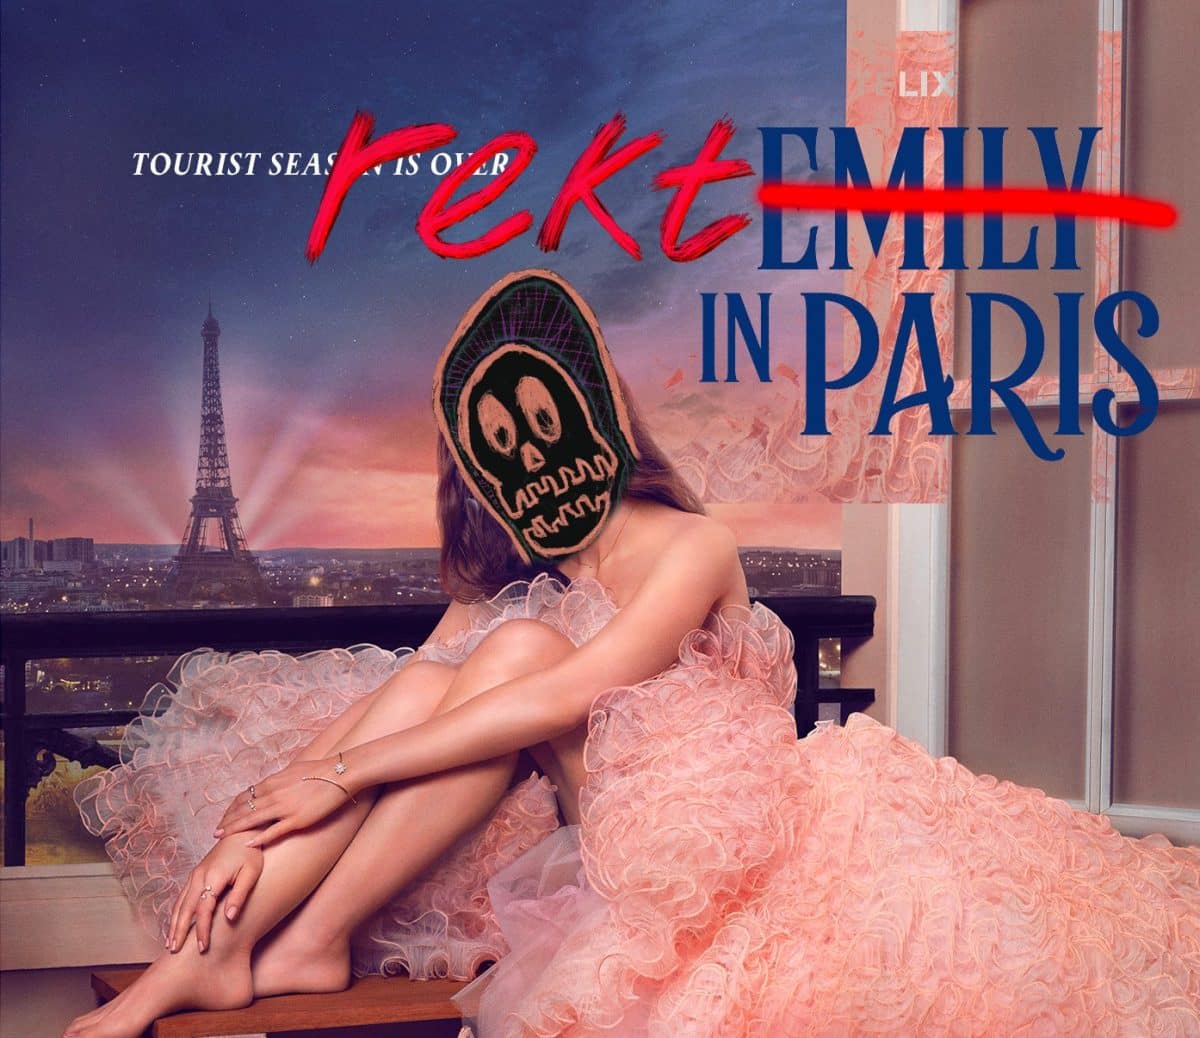 image of 'Emily in Paris' poster of woman sitting on window ledge in pink dress, but NFT of REKT guy is pasted over her face for NFT Paris